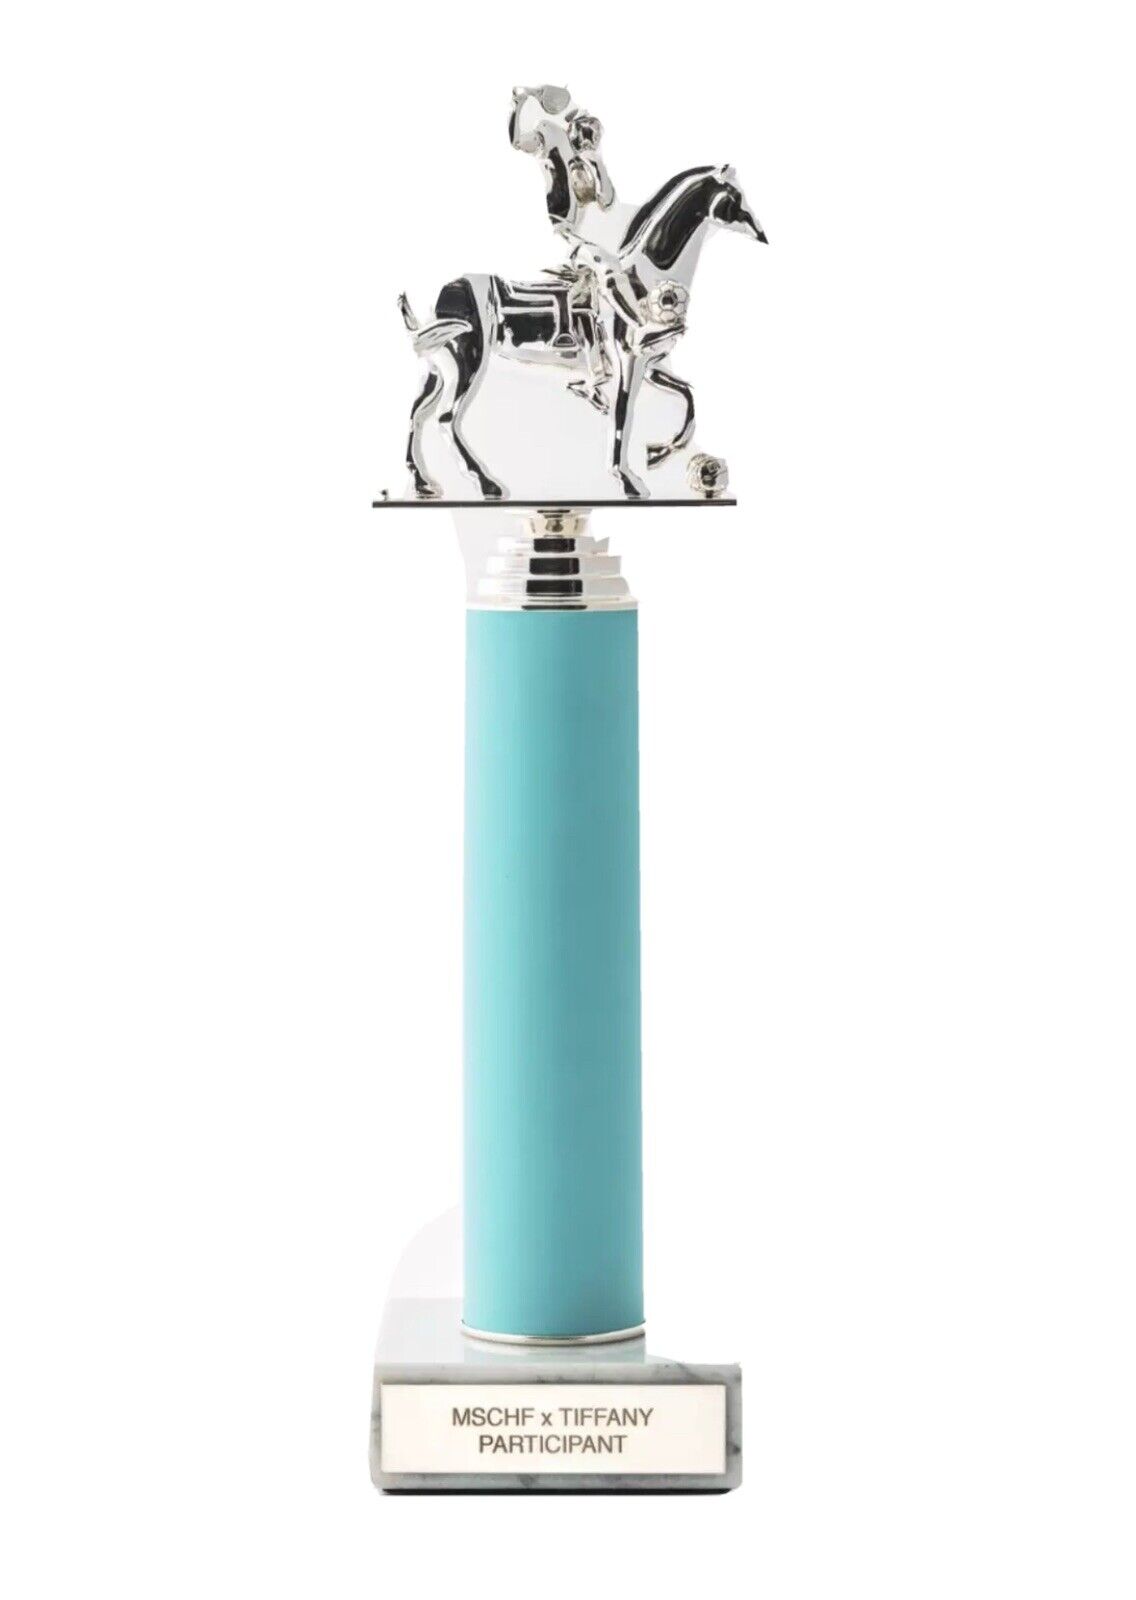 MSCHF x Tiffany & Co. Ultimate Participation Trophy LE 100 Confirmed Order